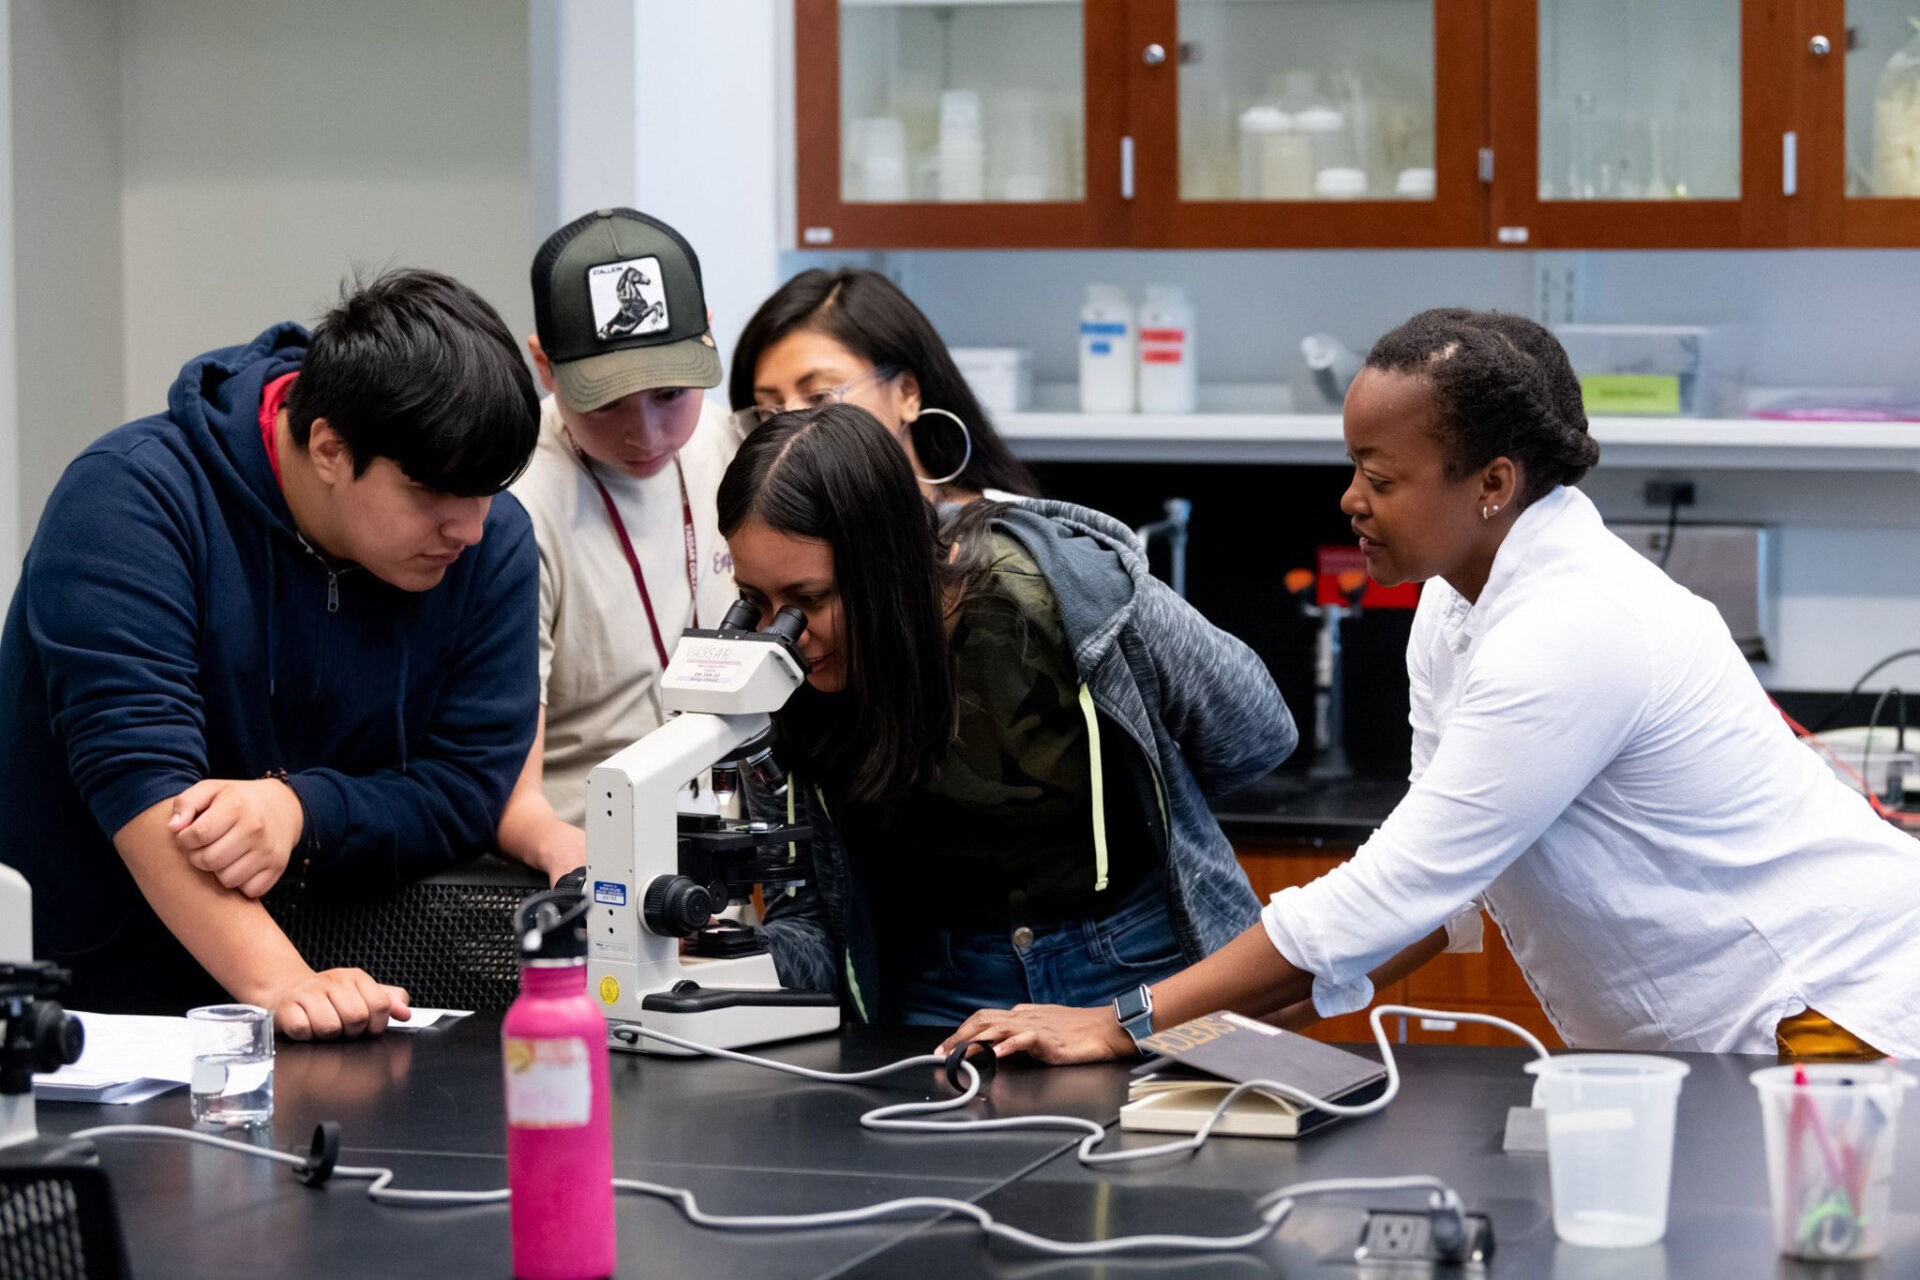 Three students, two men and one woman, look on as another female student looks through a microscope in a science lab while another woman looks on.